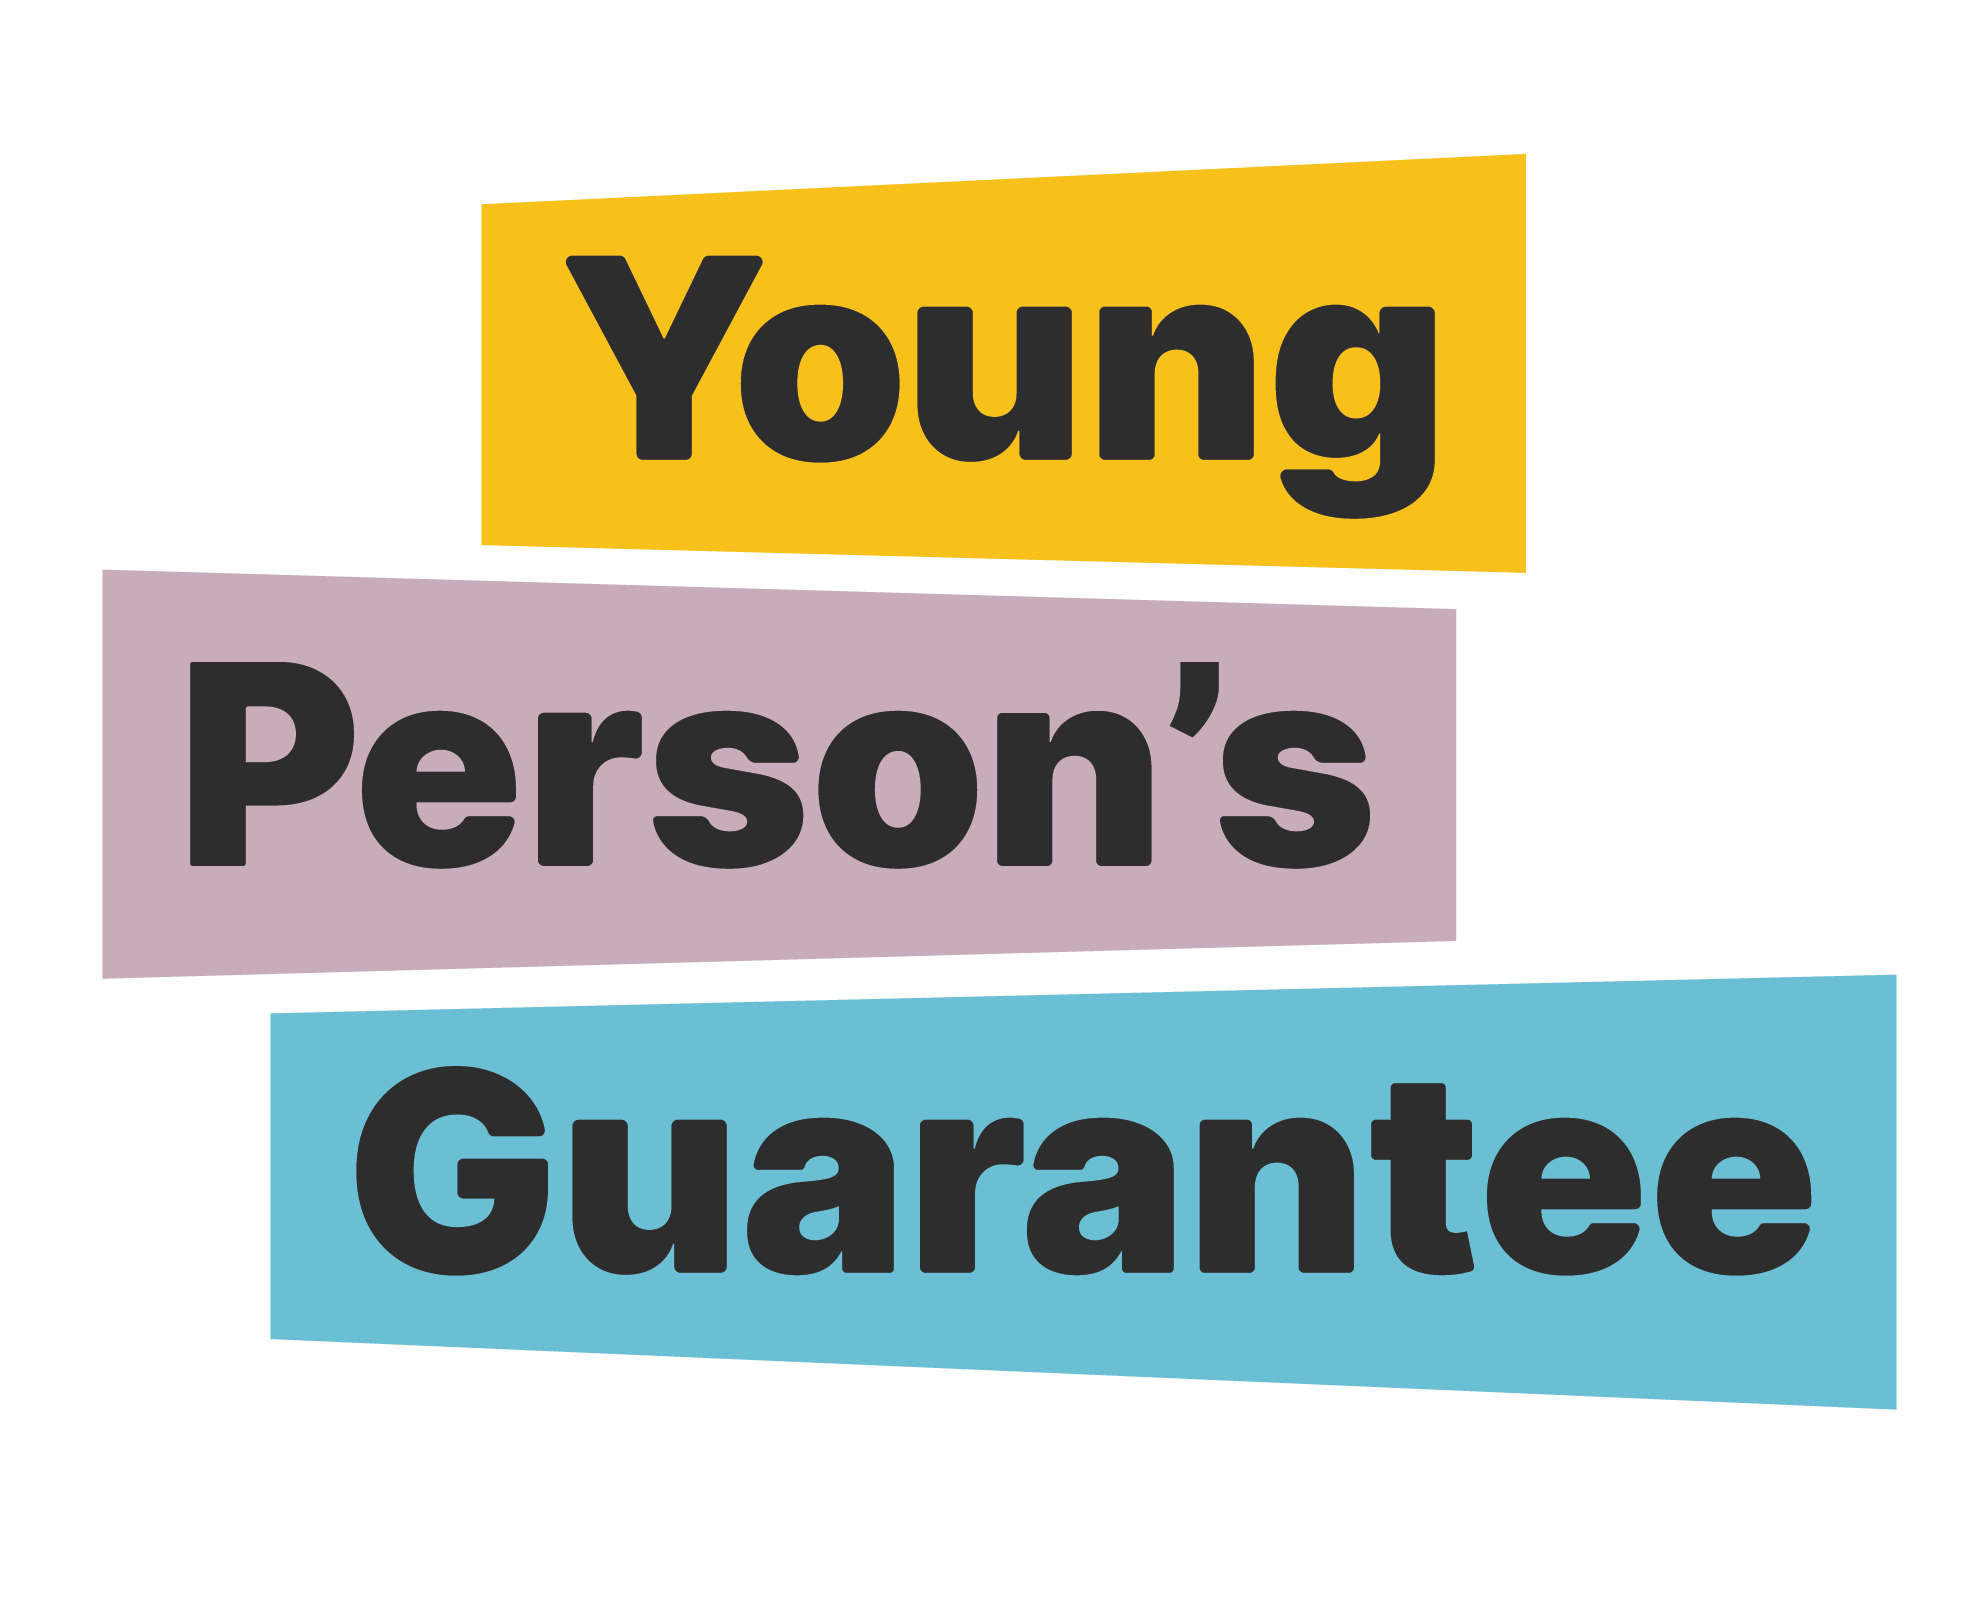 The Young Person's Guarantee 